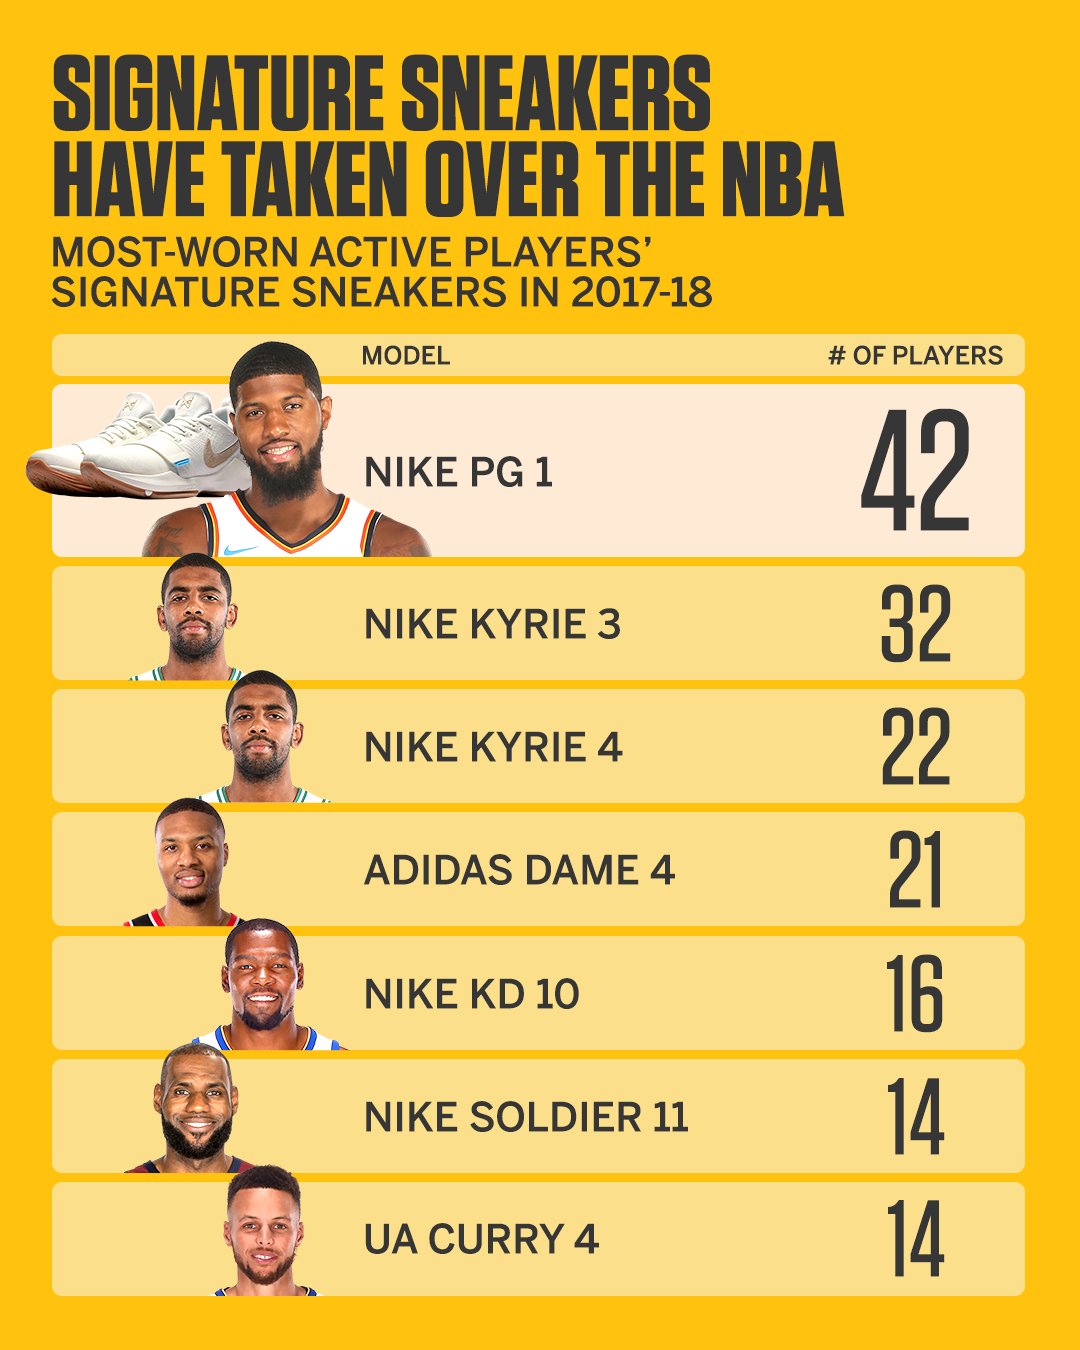 nike pg 1 most worn shoe by nba players 